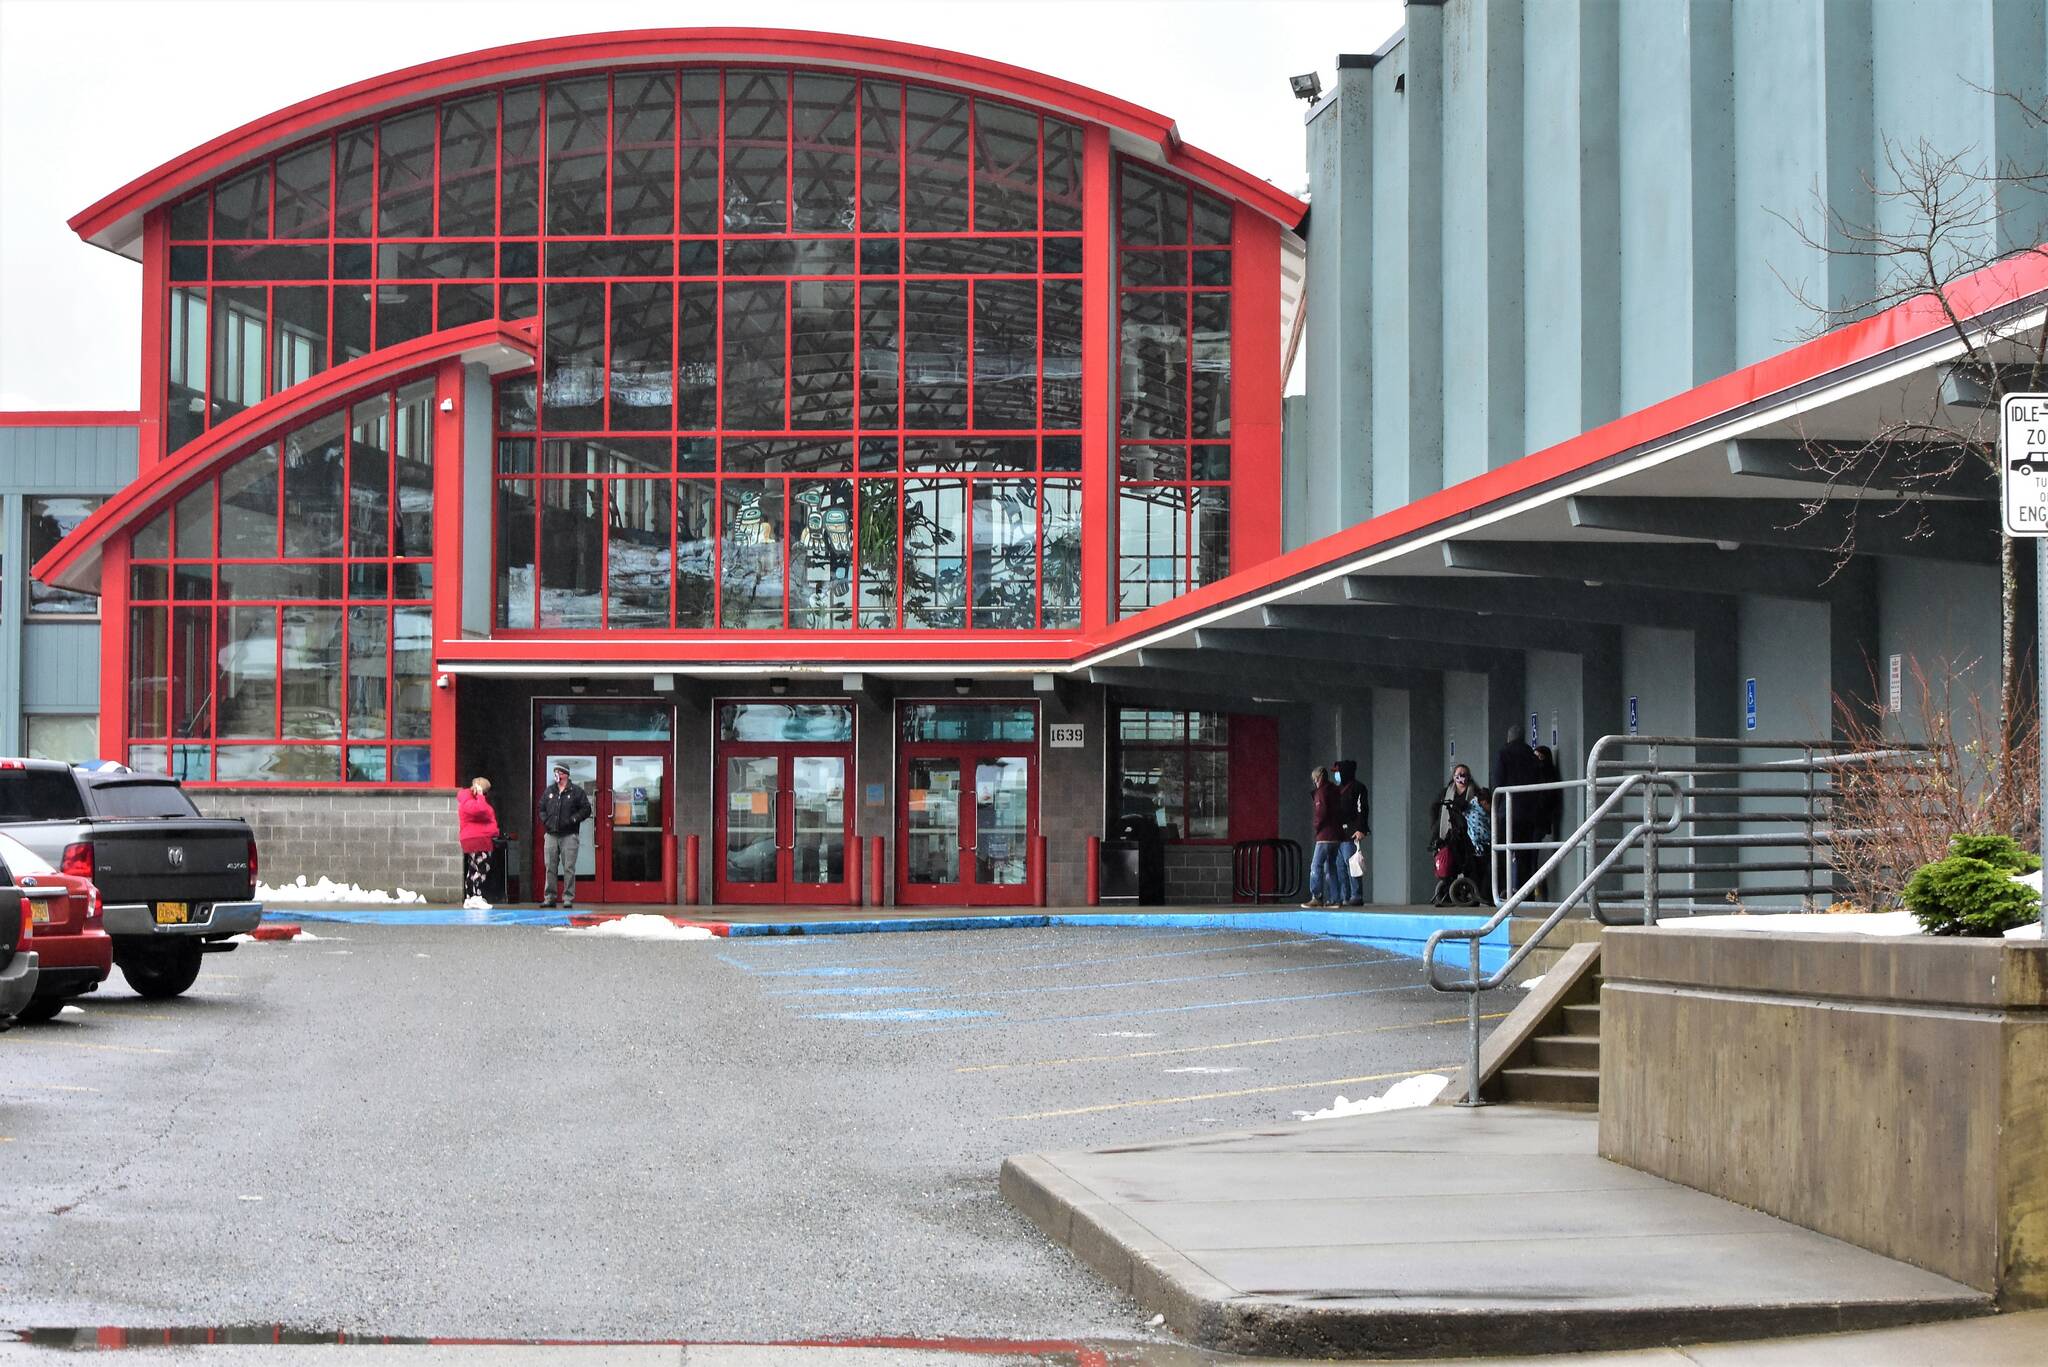 Juneau Douglas High School: Yadaa.at Kale, pictured here in November 2020. The school board’s decision to prevent the basketball team from going to the Region V state tournament because of a district policy that precluded traveling to regions with high levels of coronavirus risk is one of the issues that prompted Kyle Scholl to run as a write-in candidate. (Peter Segall / Juneau Empire File)